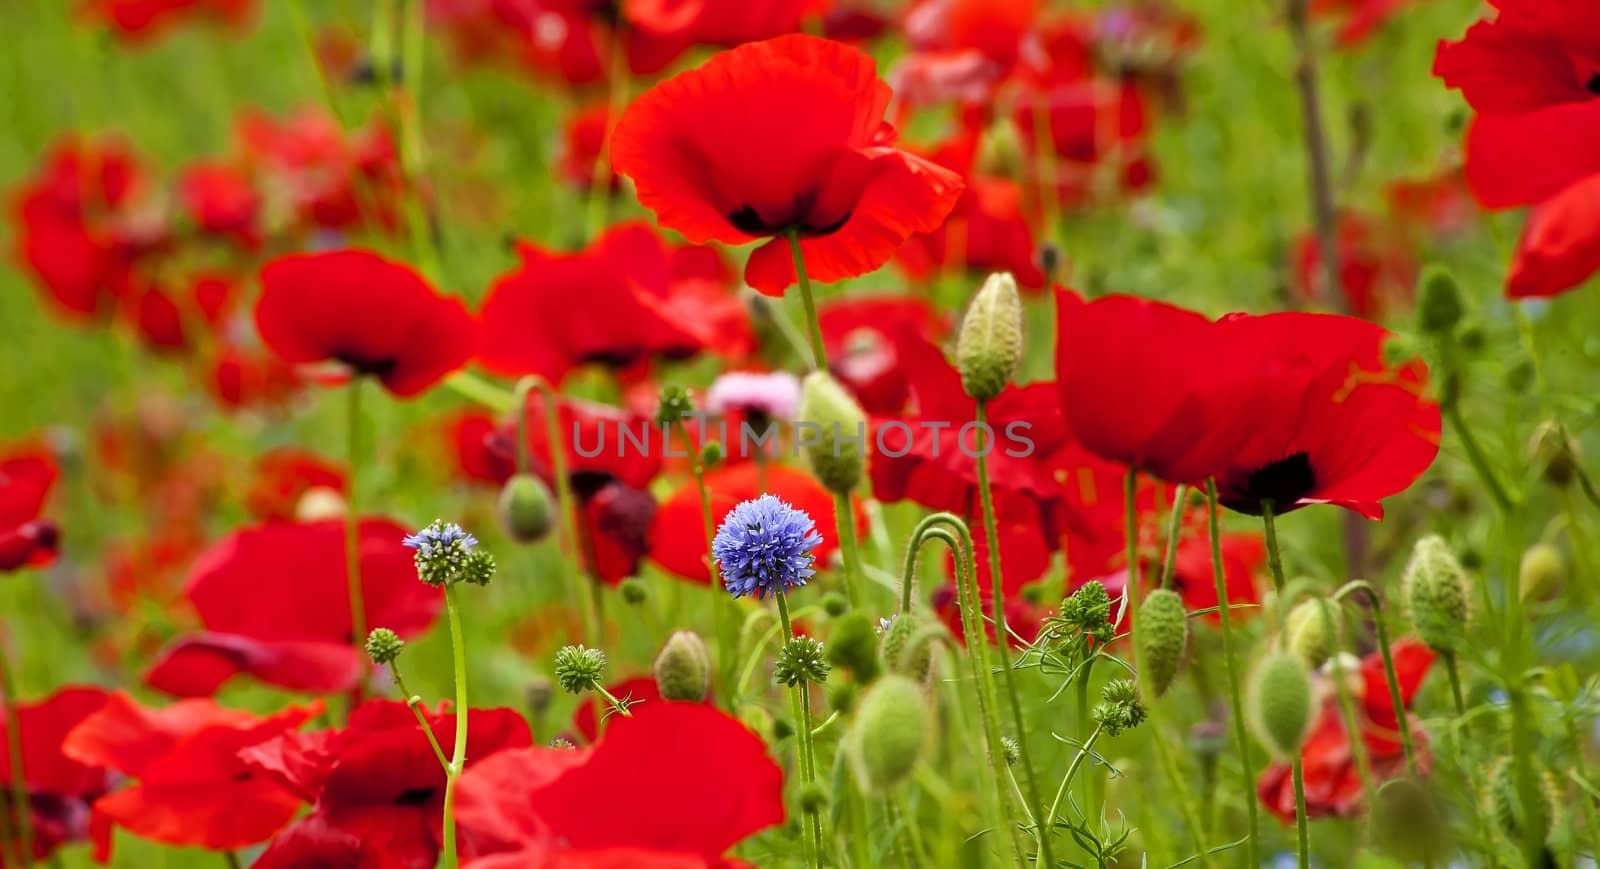 Red Poppies Flowers Blue Clover in Field Snoqualme Washington Papaver Rhoeas Common Poppy Flower

Resubmit--In response to comments from reviewer have further processed image to reduce noise, sharpen focus and adjust lighting.